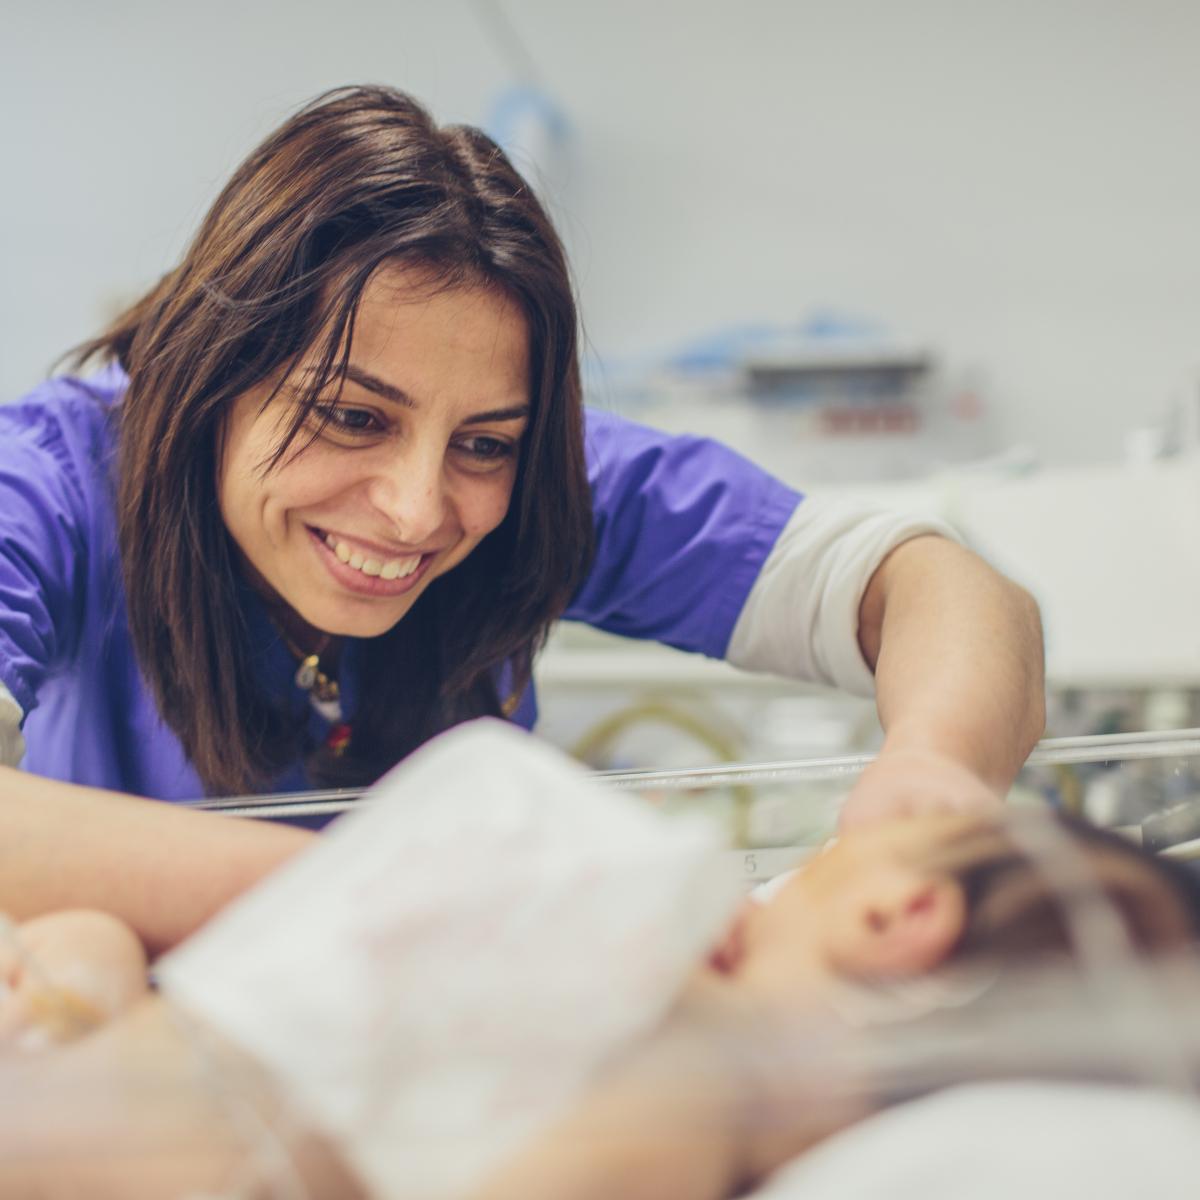 A doctor smiles at a baby